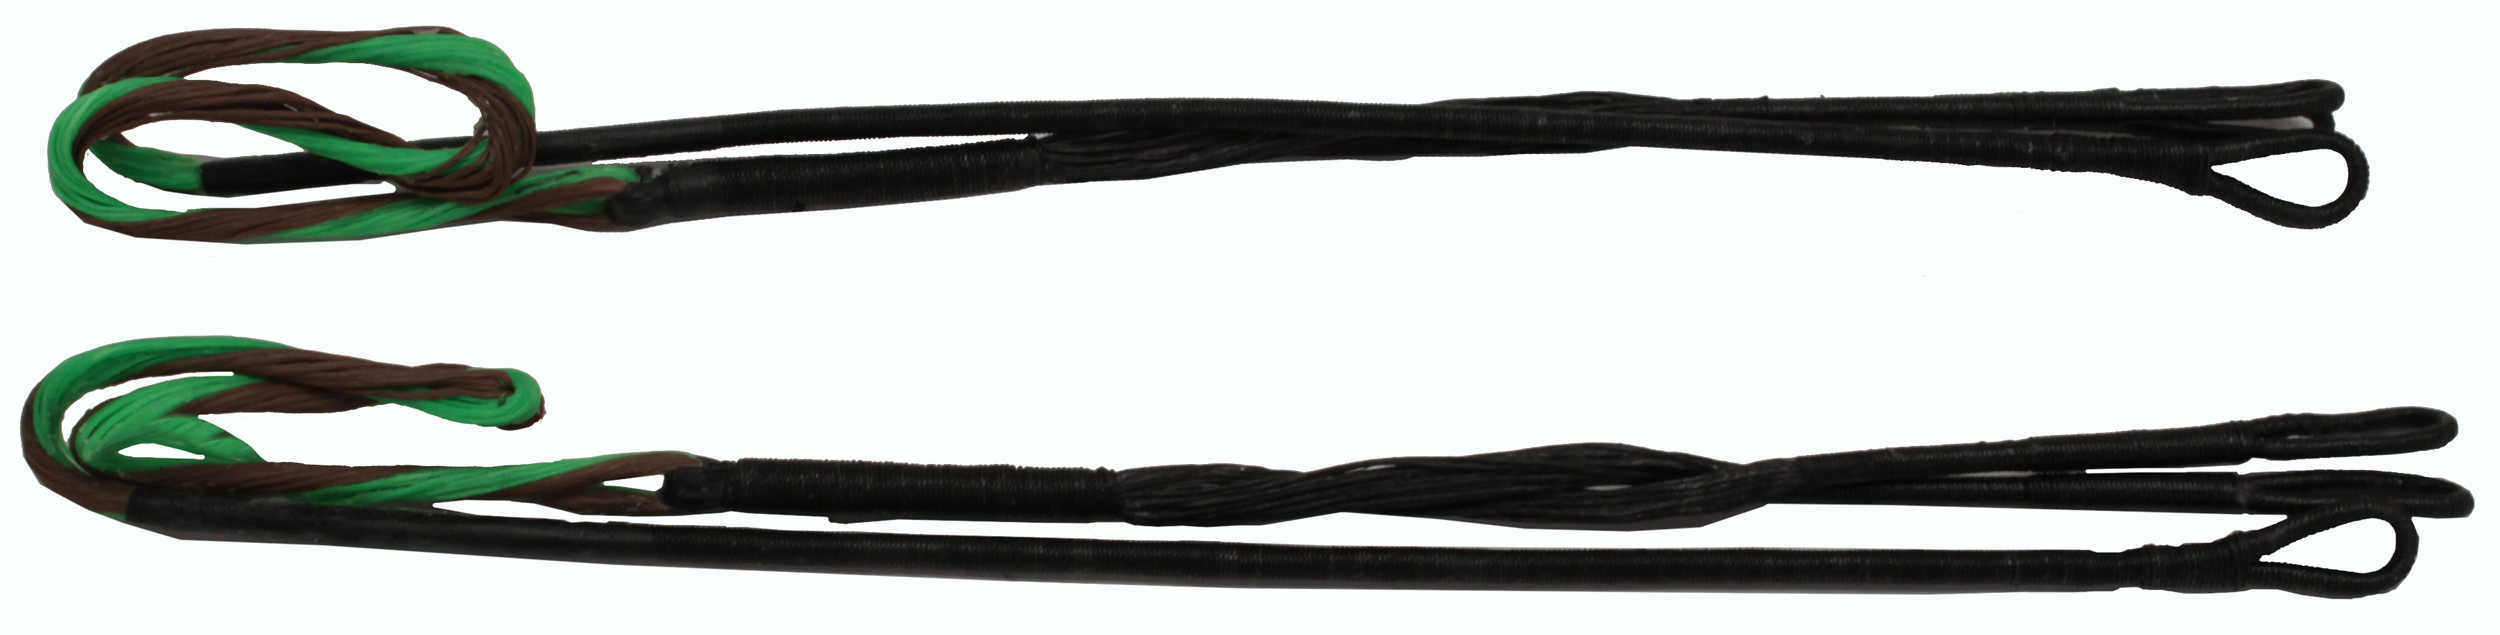 Barnett Replacement Cables Penetrator(2011 & Current) Md: 16141